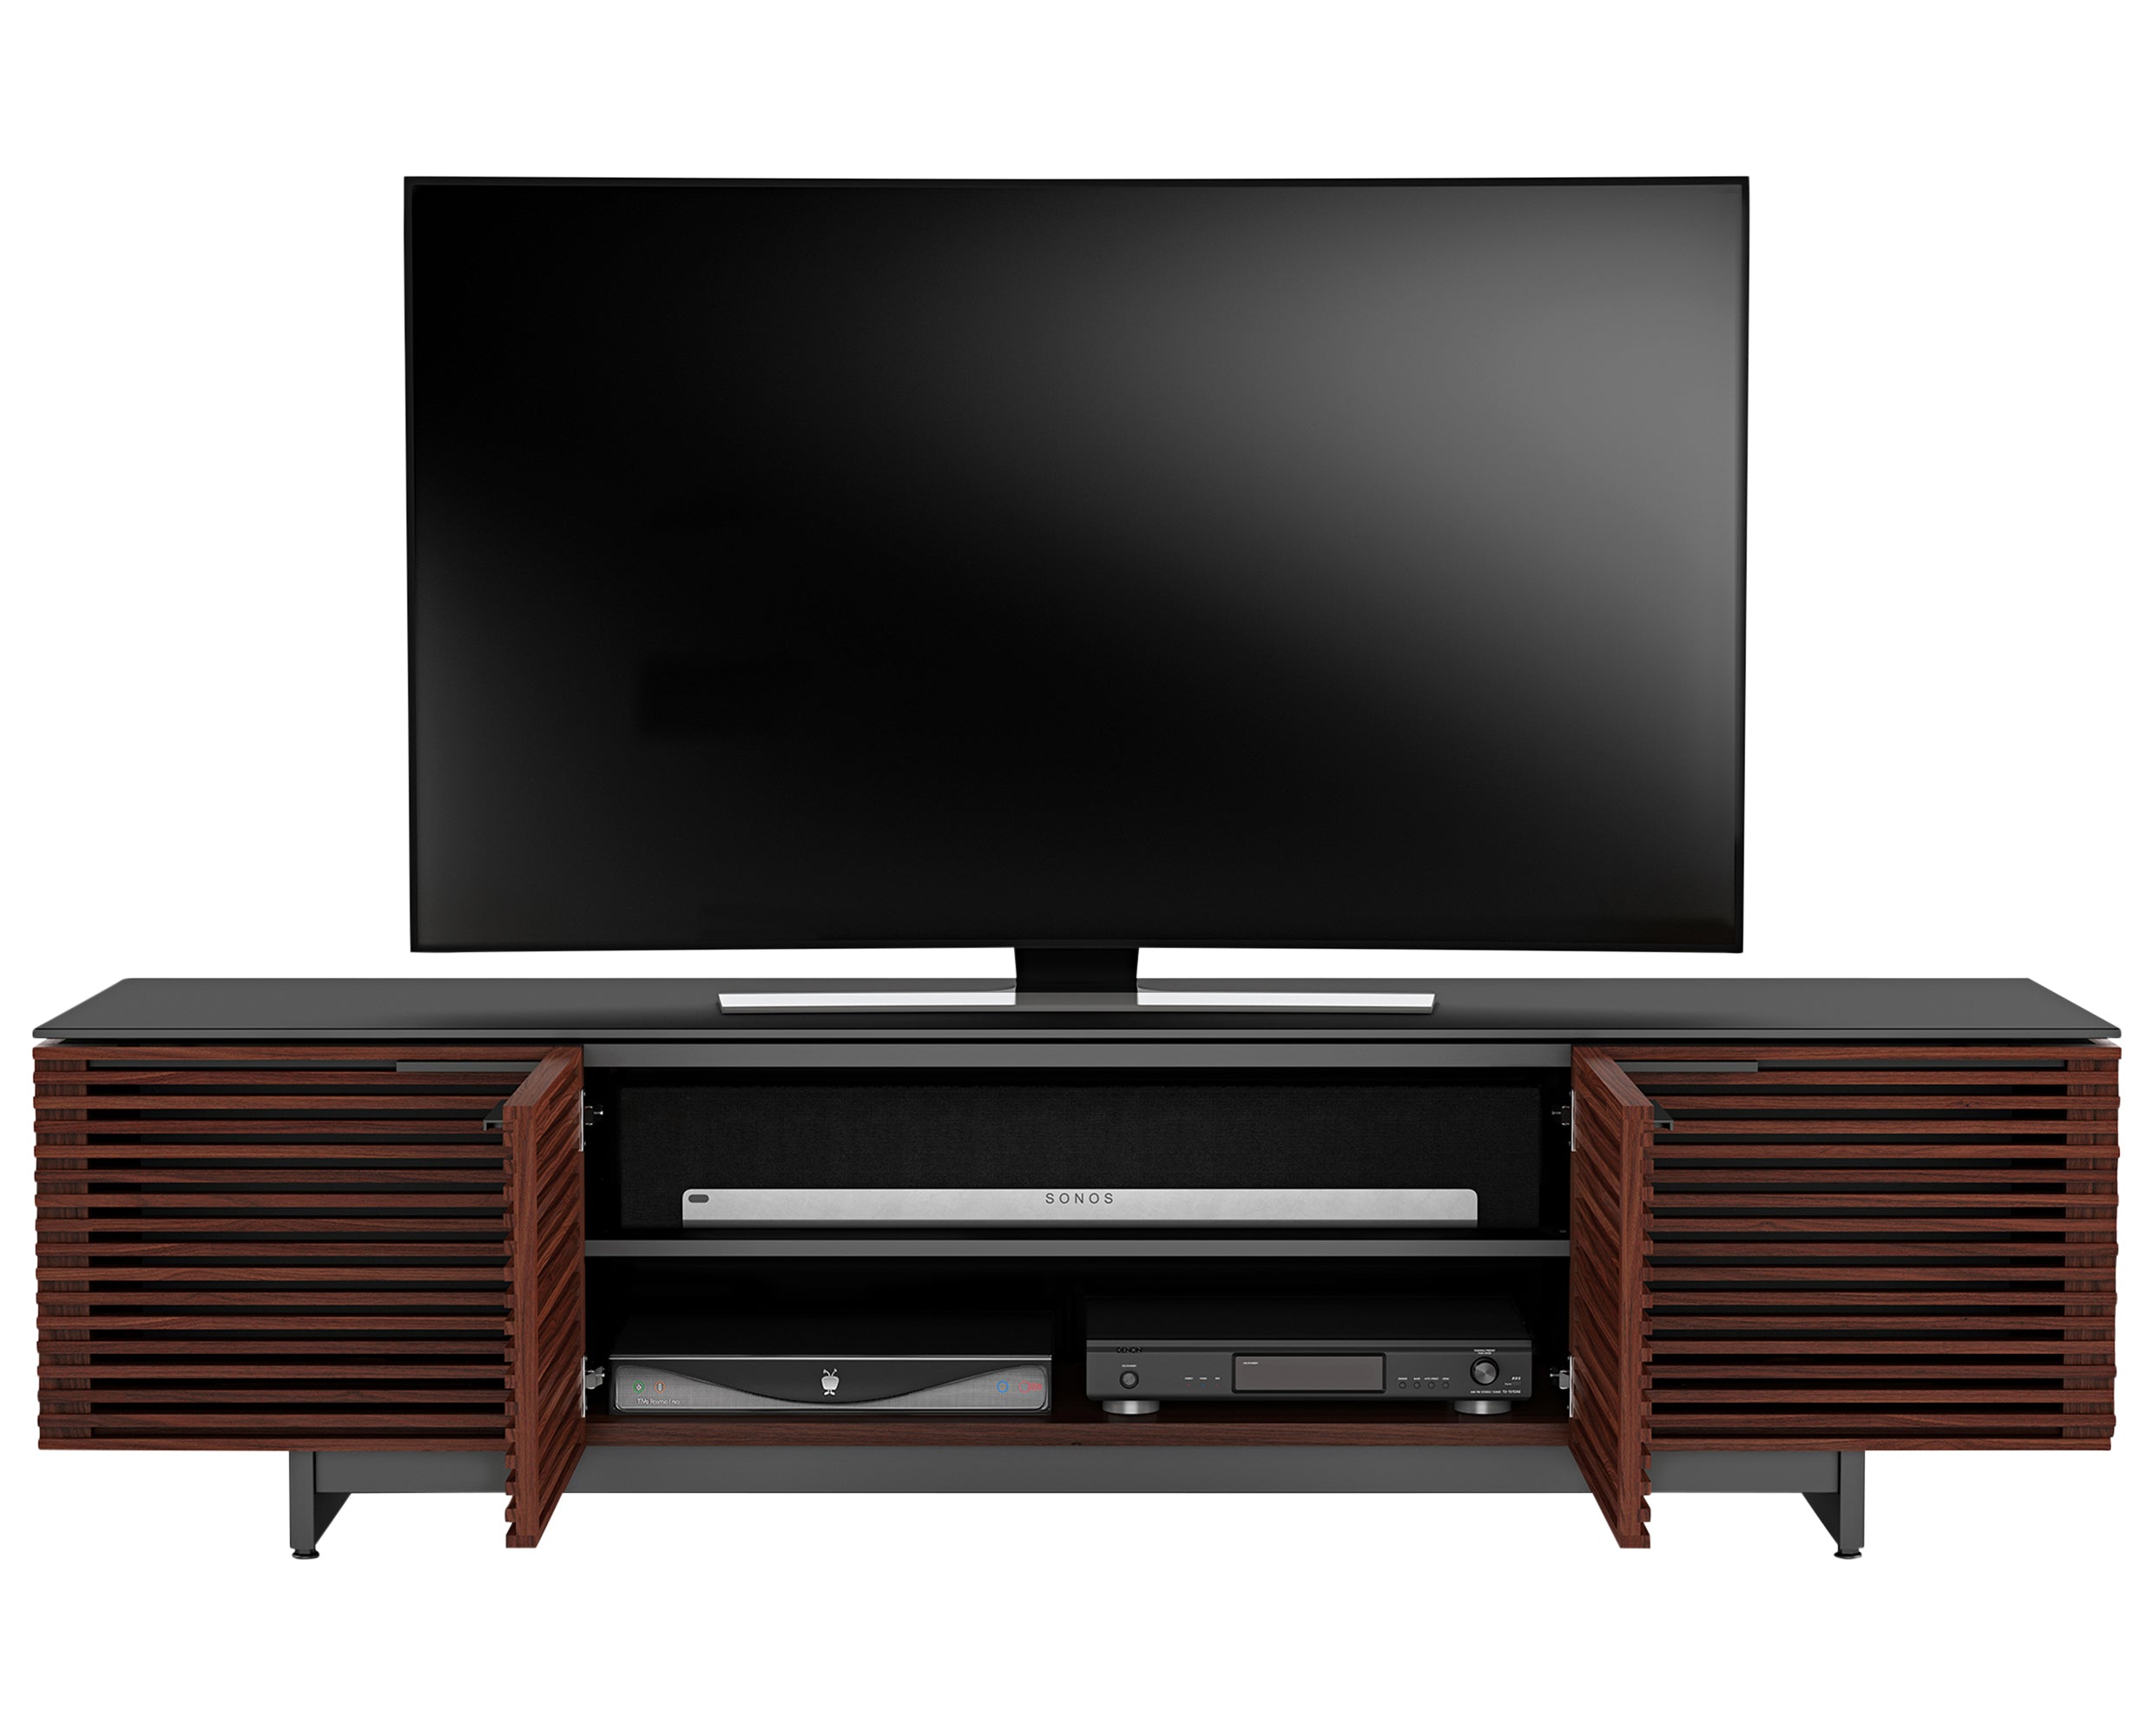 Chocolate Stained Walnut &amp; Chocolate Walnut Veneer with Black Satin-Etched Glass &amp; Black Steel | BDI Corridor Low Profile TV Stand | Valley Ridge Furniture